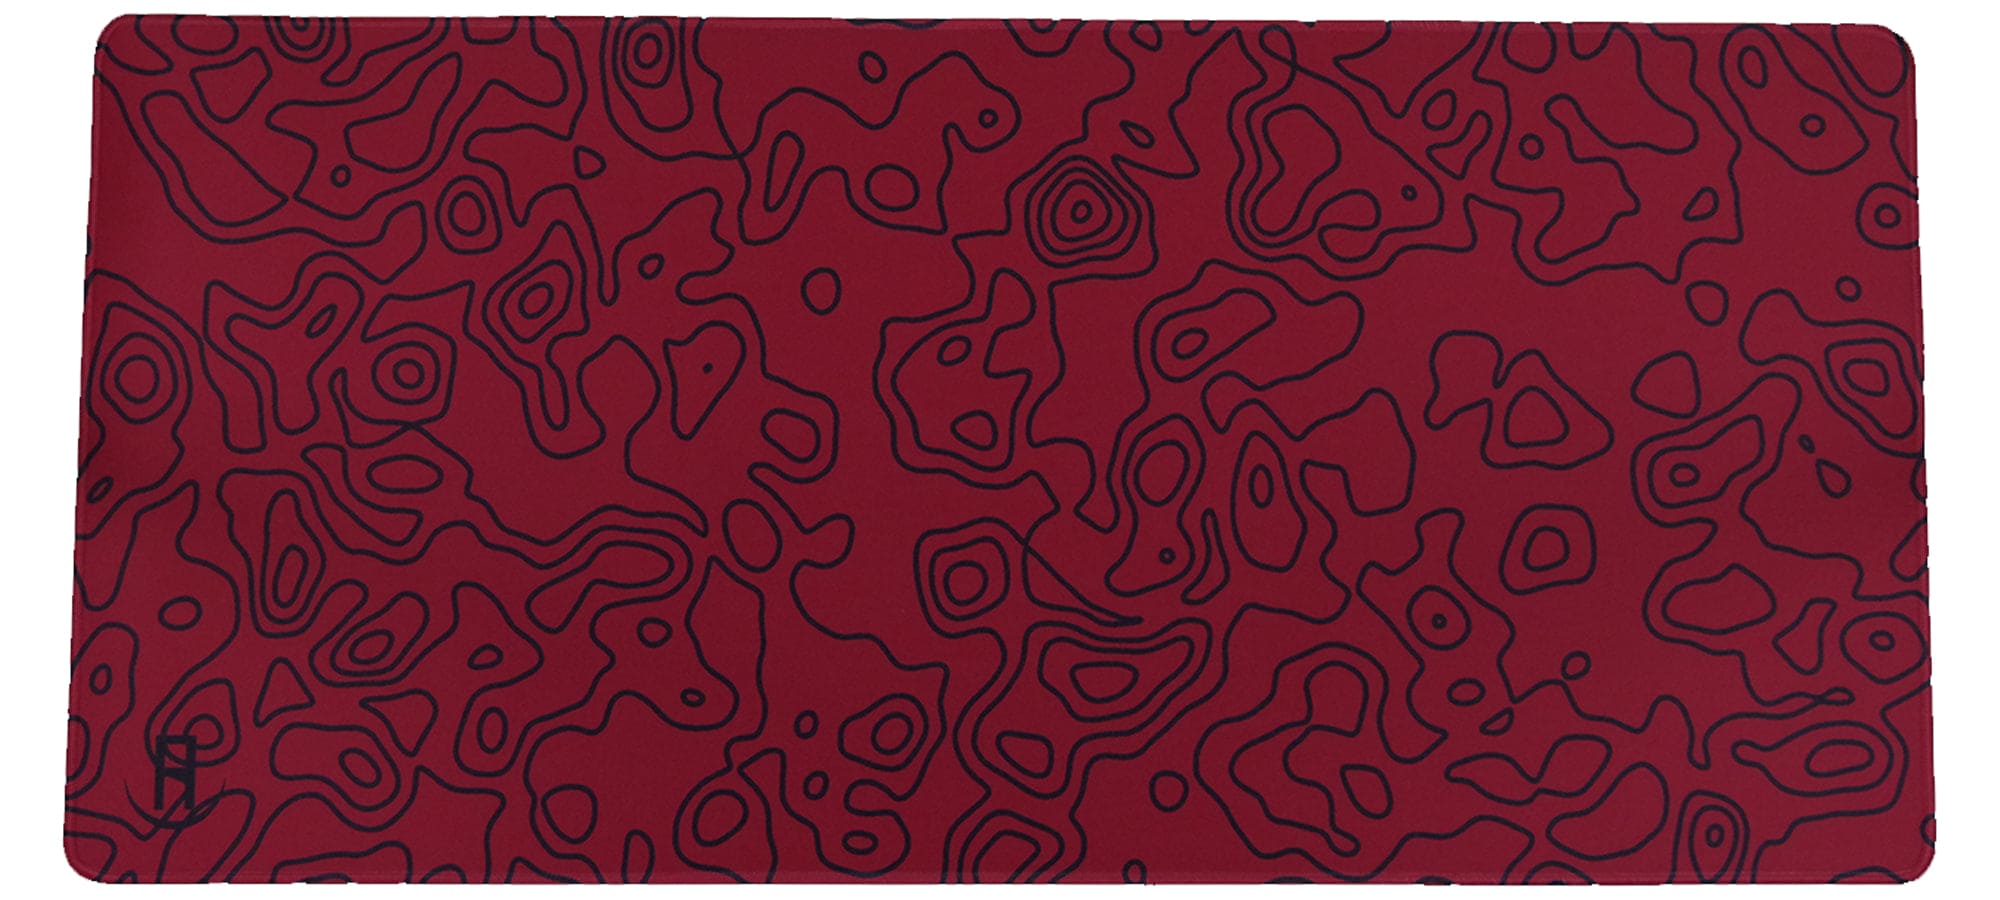 Red topography deskpad and mousepad front view